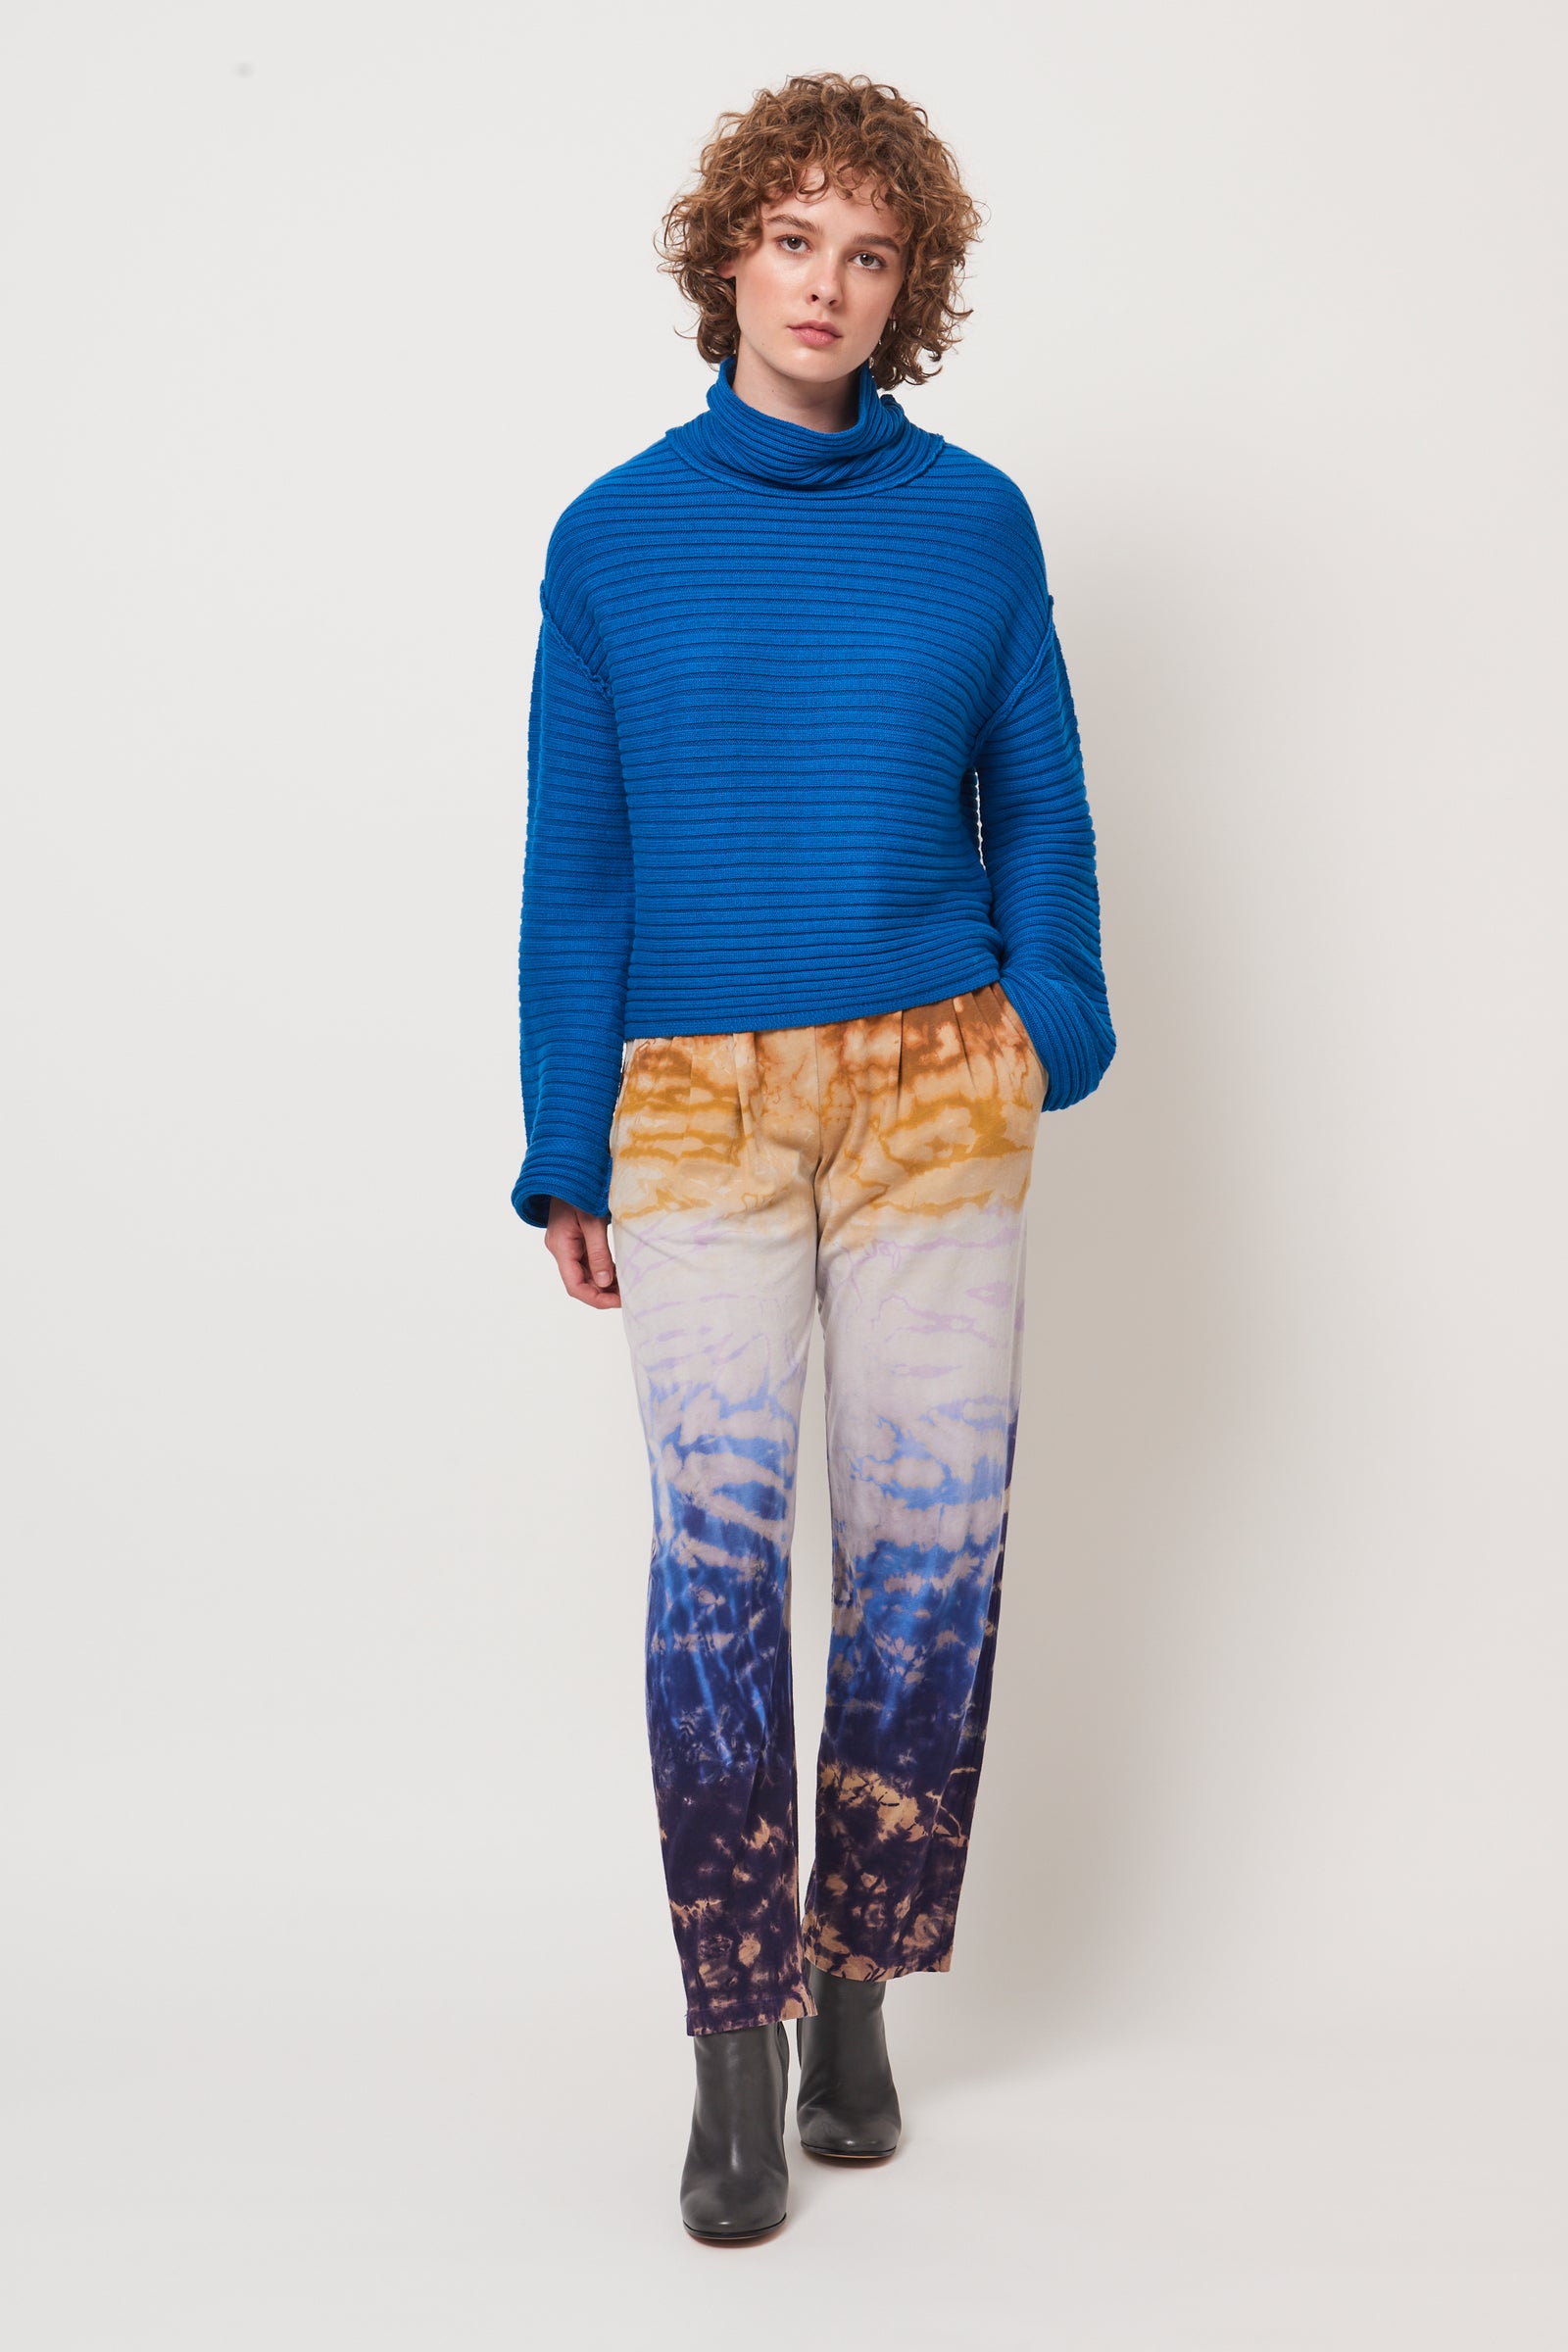 Klein Blue Pema Pullover RA-SWEATER ARCHIVE-FALL1'23   